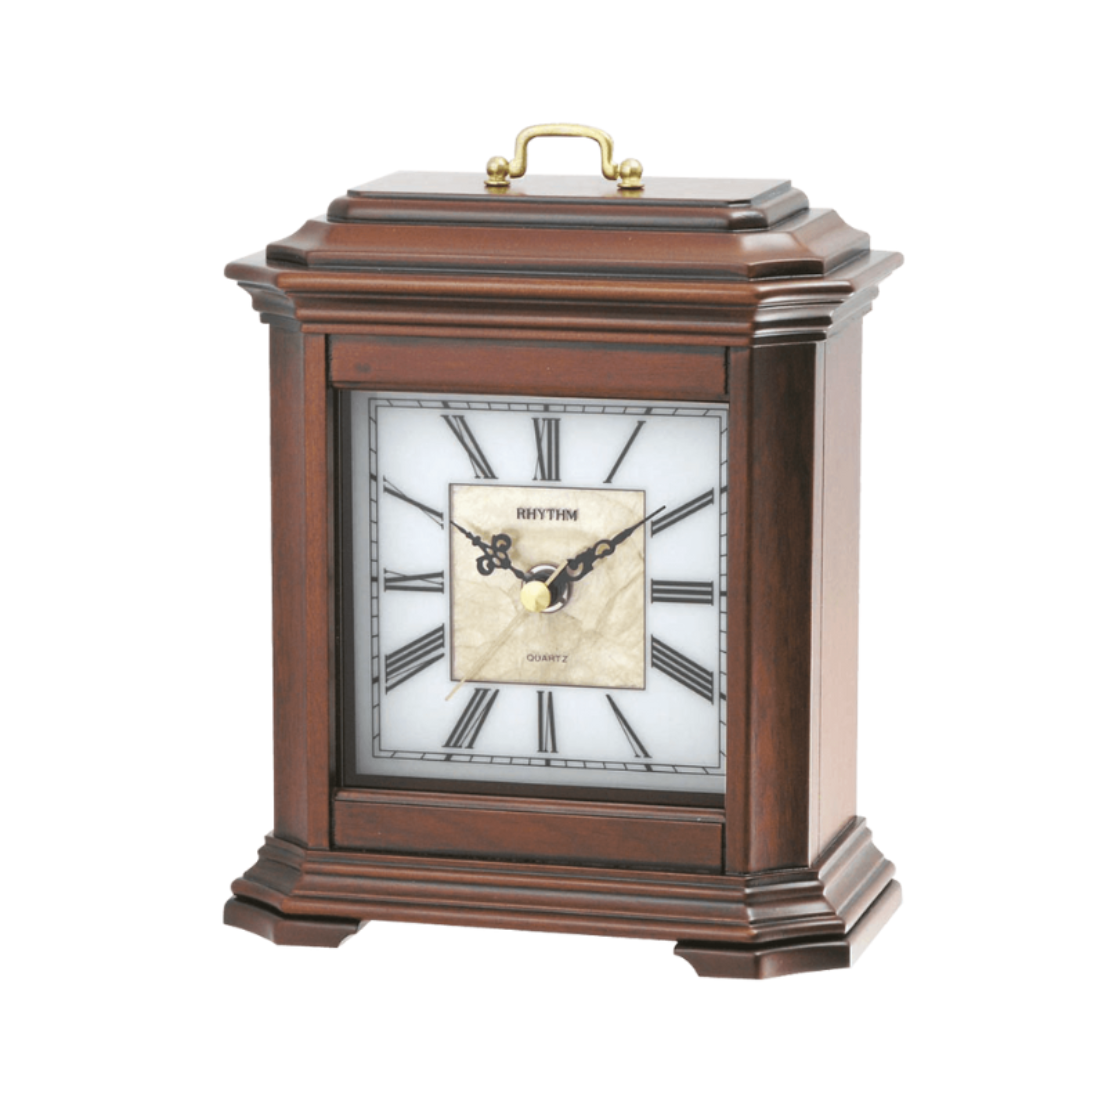 Rhythm Square Wooden Case Mantel Table Clock CRG114NR06 (Singapore Only)